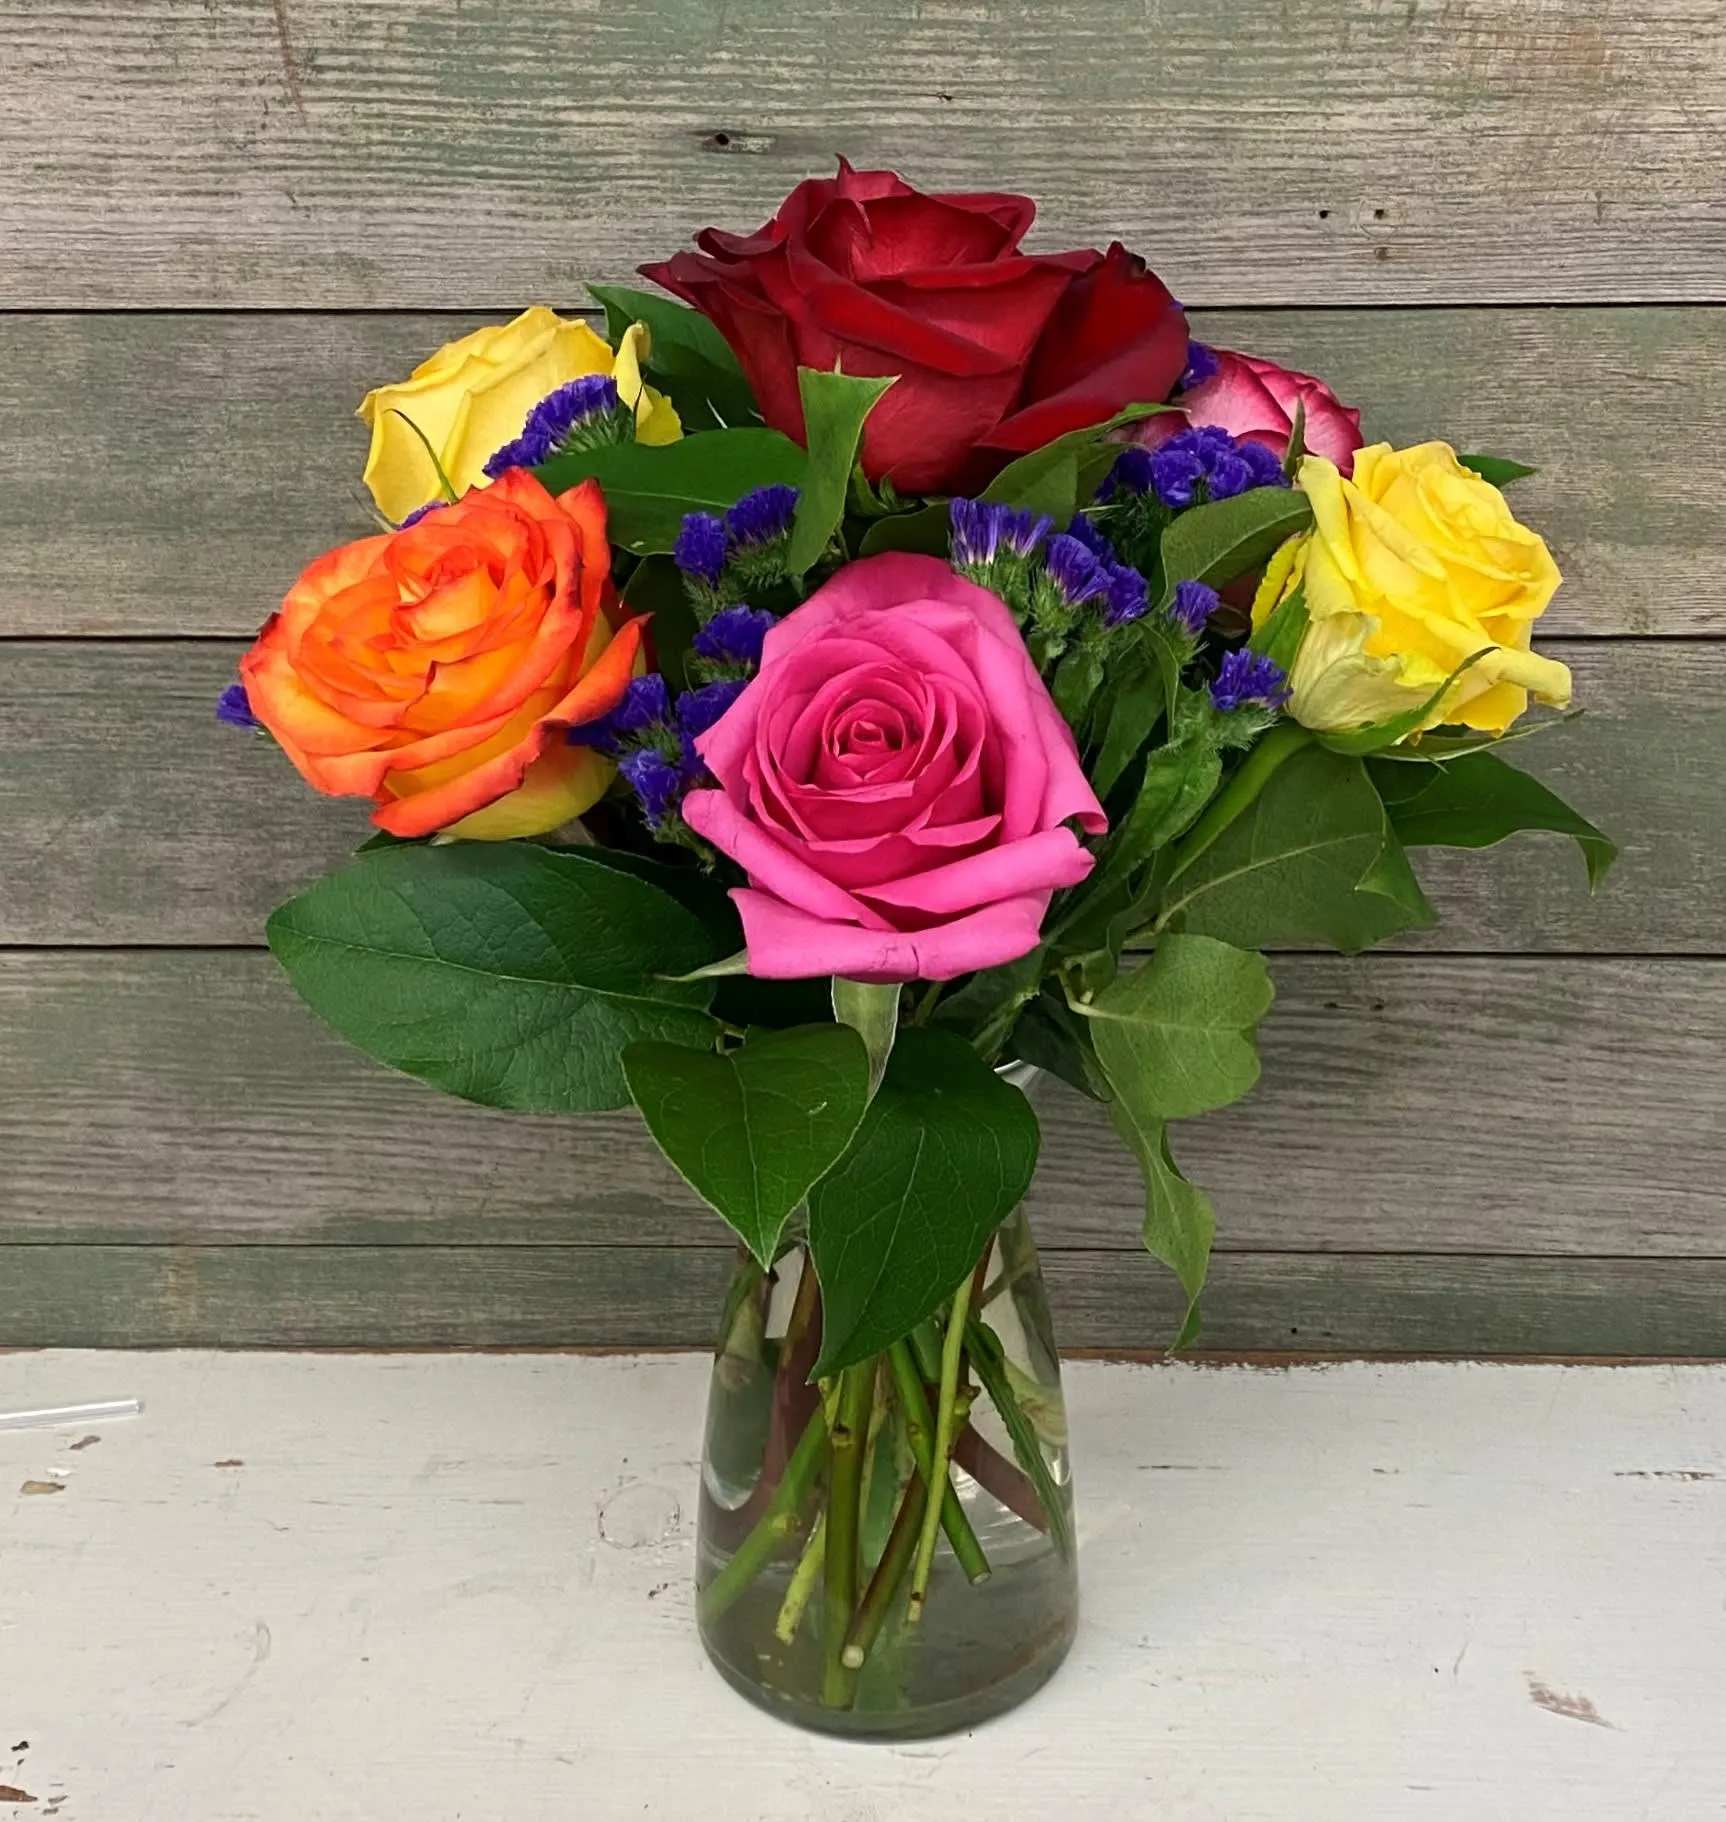 1/2 Dozen Mixed Roses  - Send the best of the best roses - allow us to hand select the best quality of roses for your arrangement - If you would like all of one color or a specific color please let us know  in the special instructions box. 